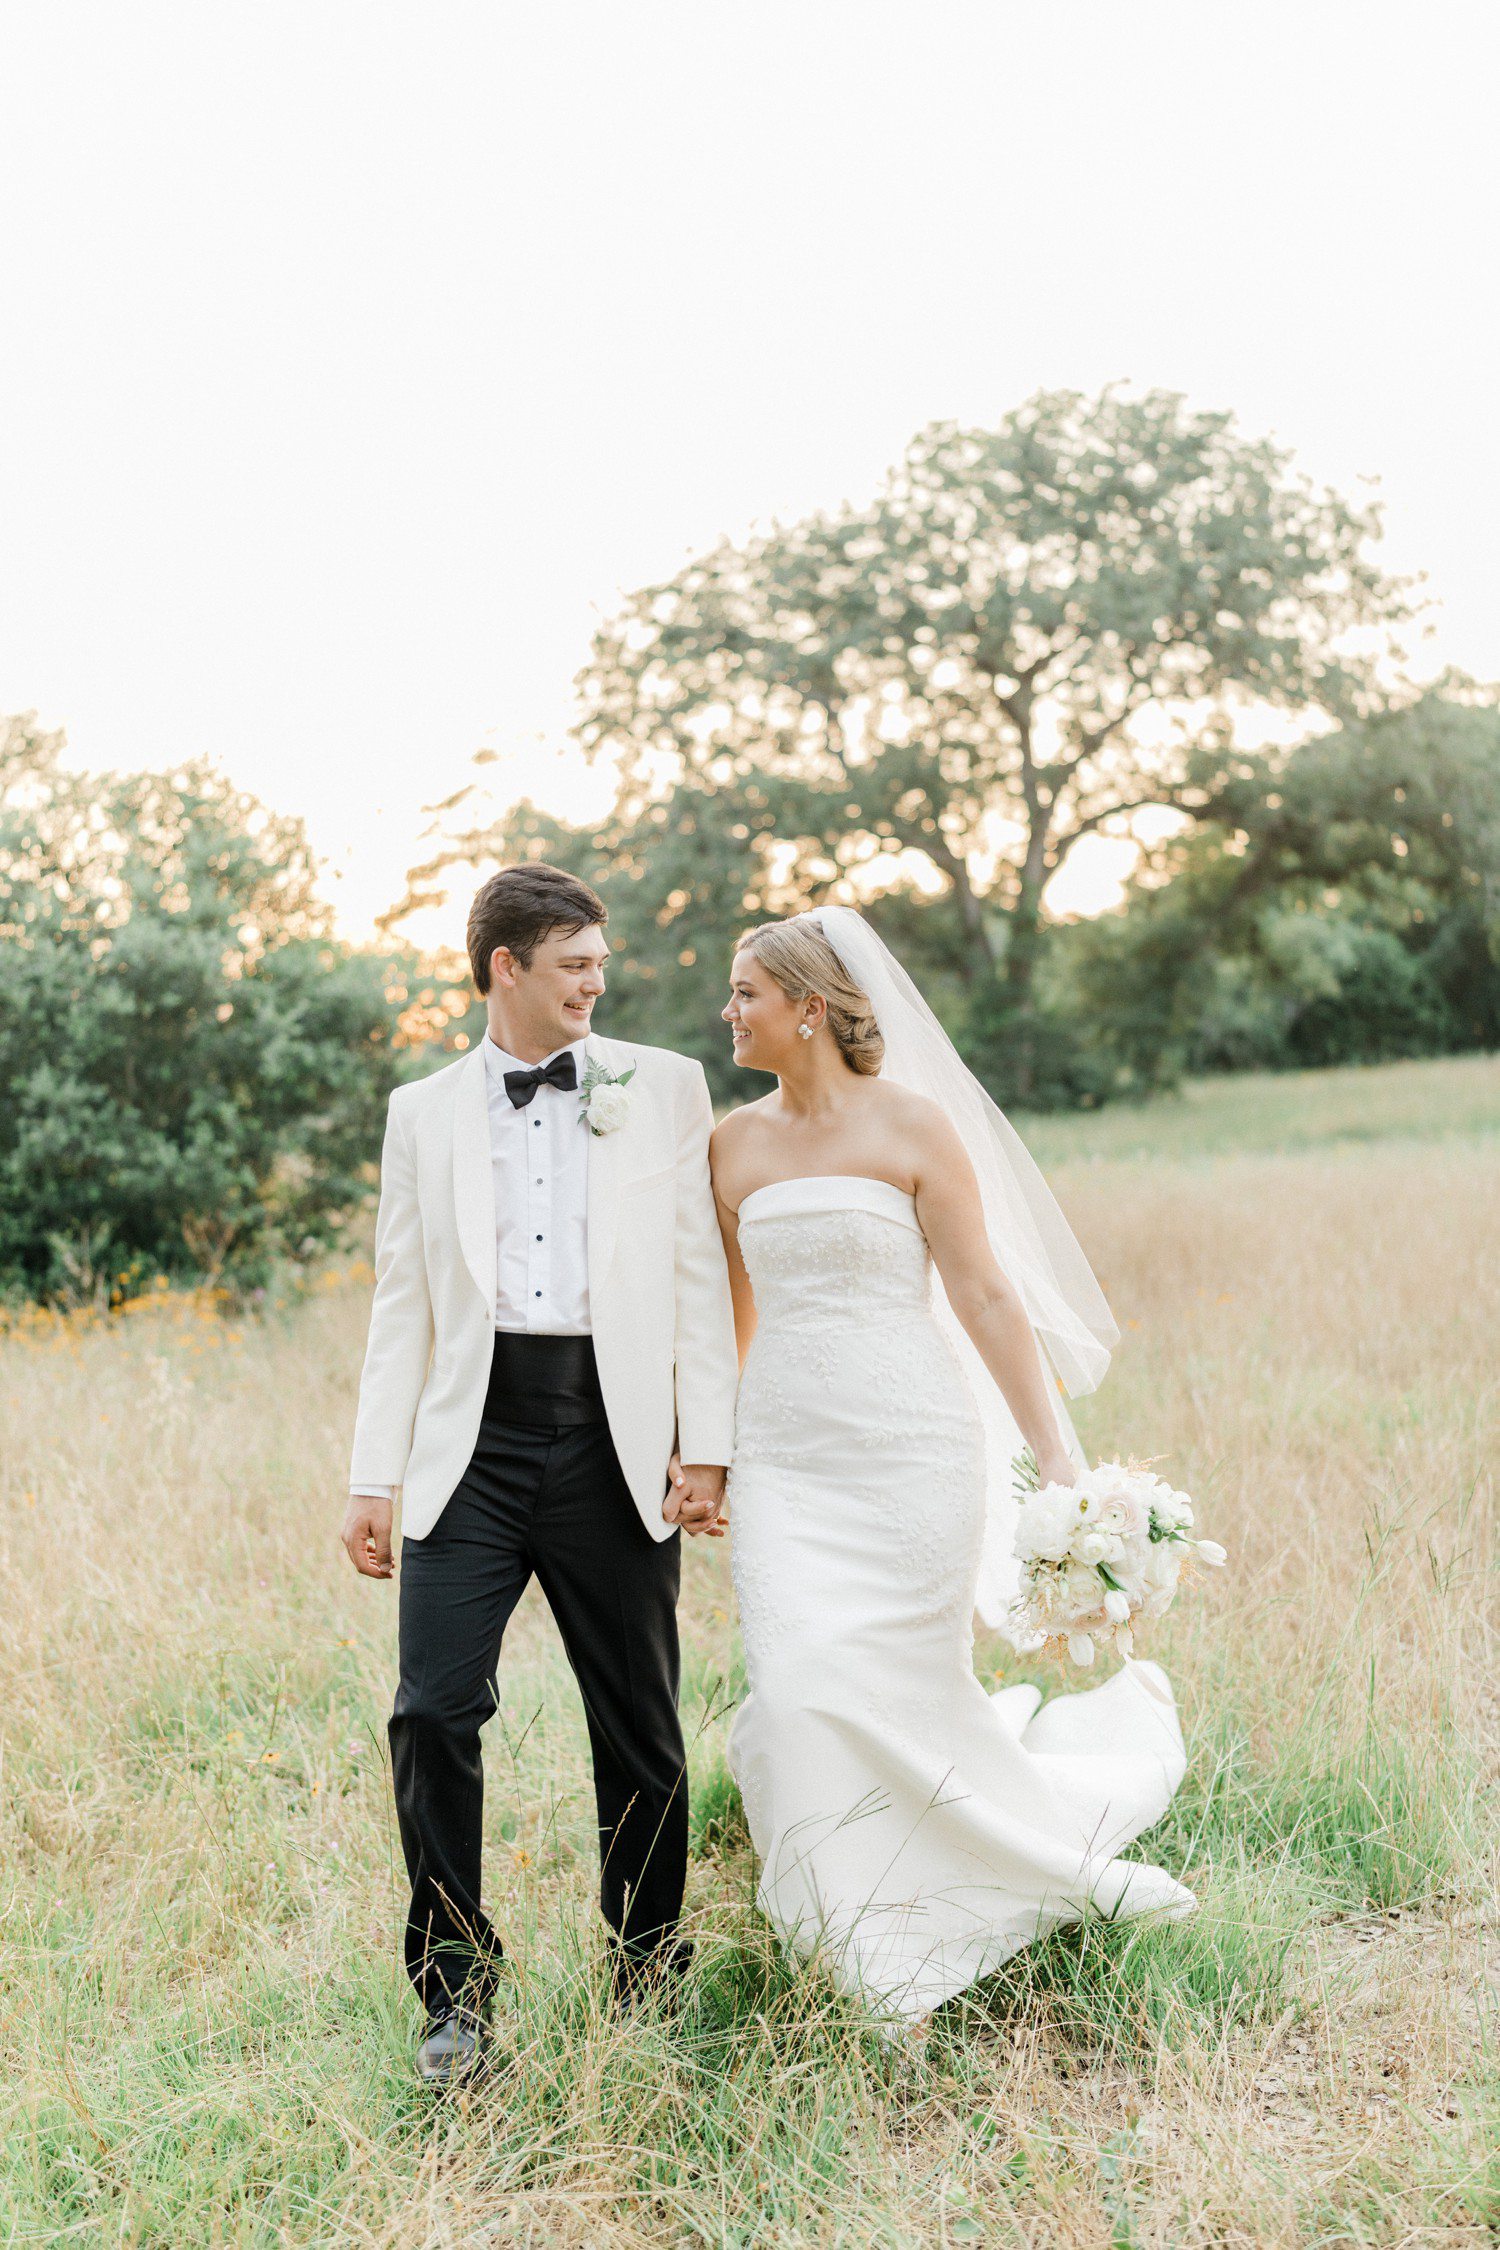 Bride and groom walking together at The Compound in Round Top TX.